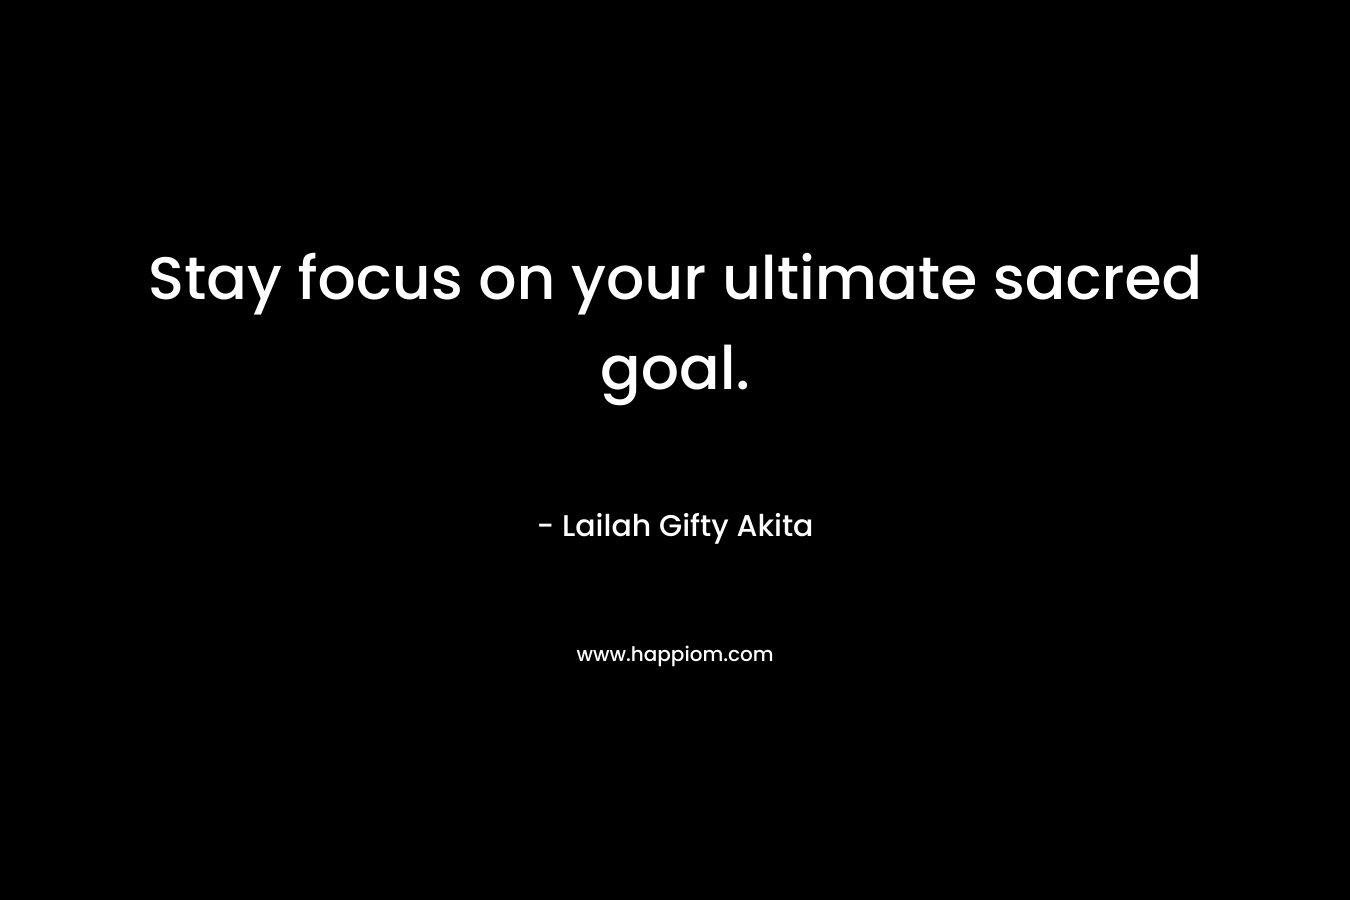 Stay focus on your ultimate sacred goal.